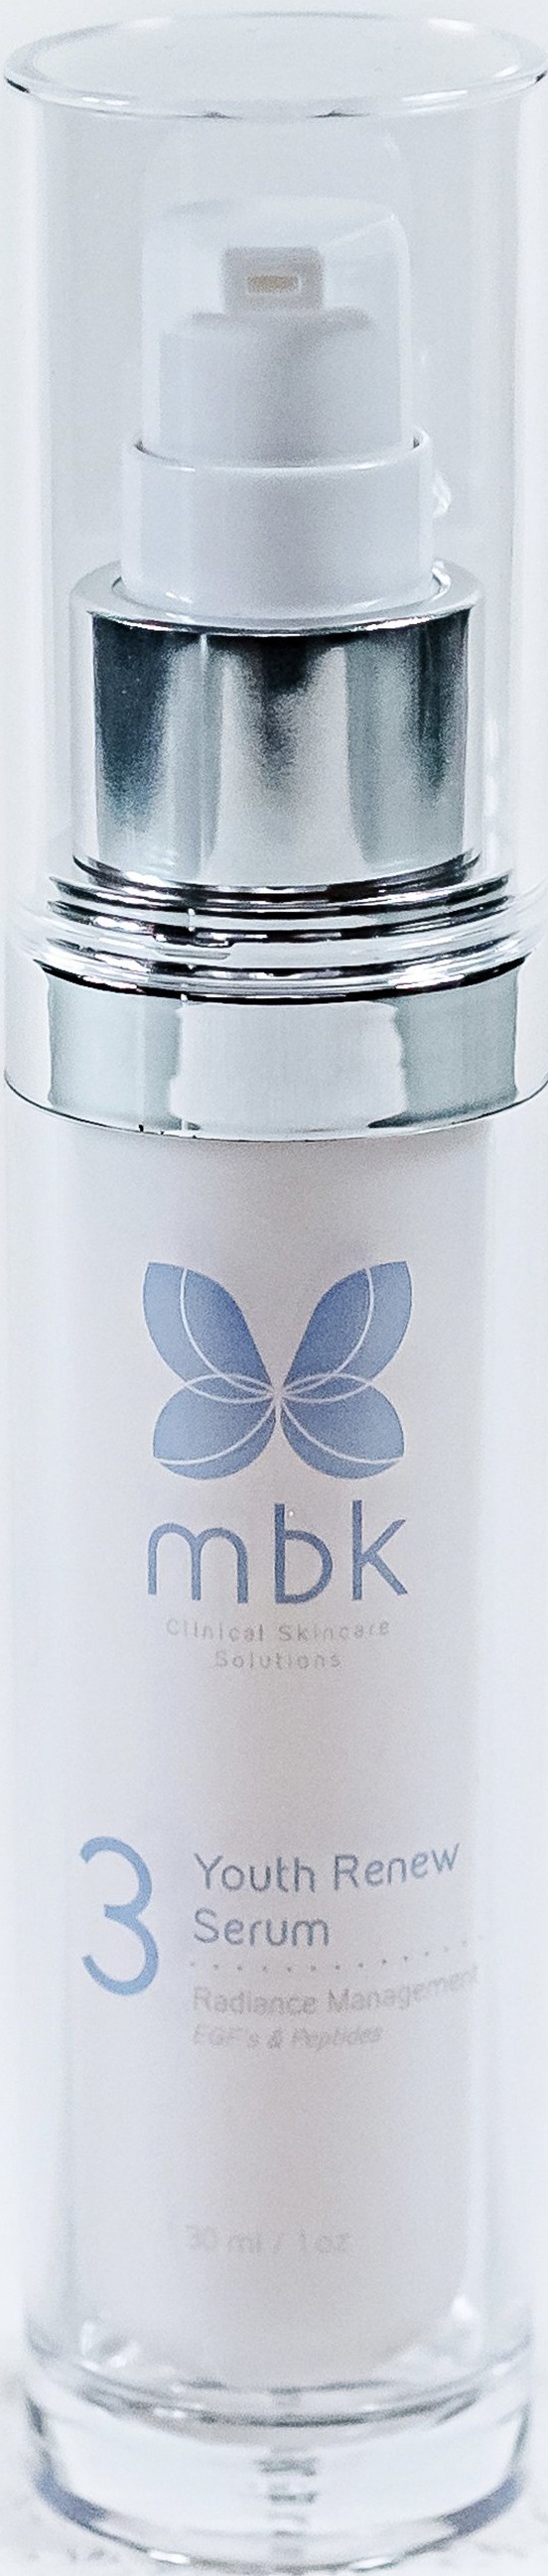 MBK Clinical Skincare Solutions Youth Renew Serum